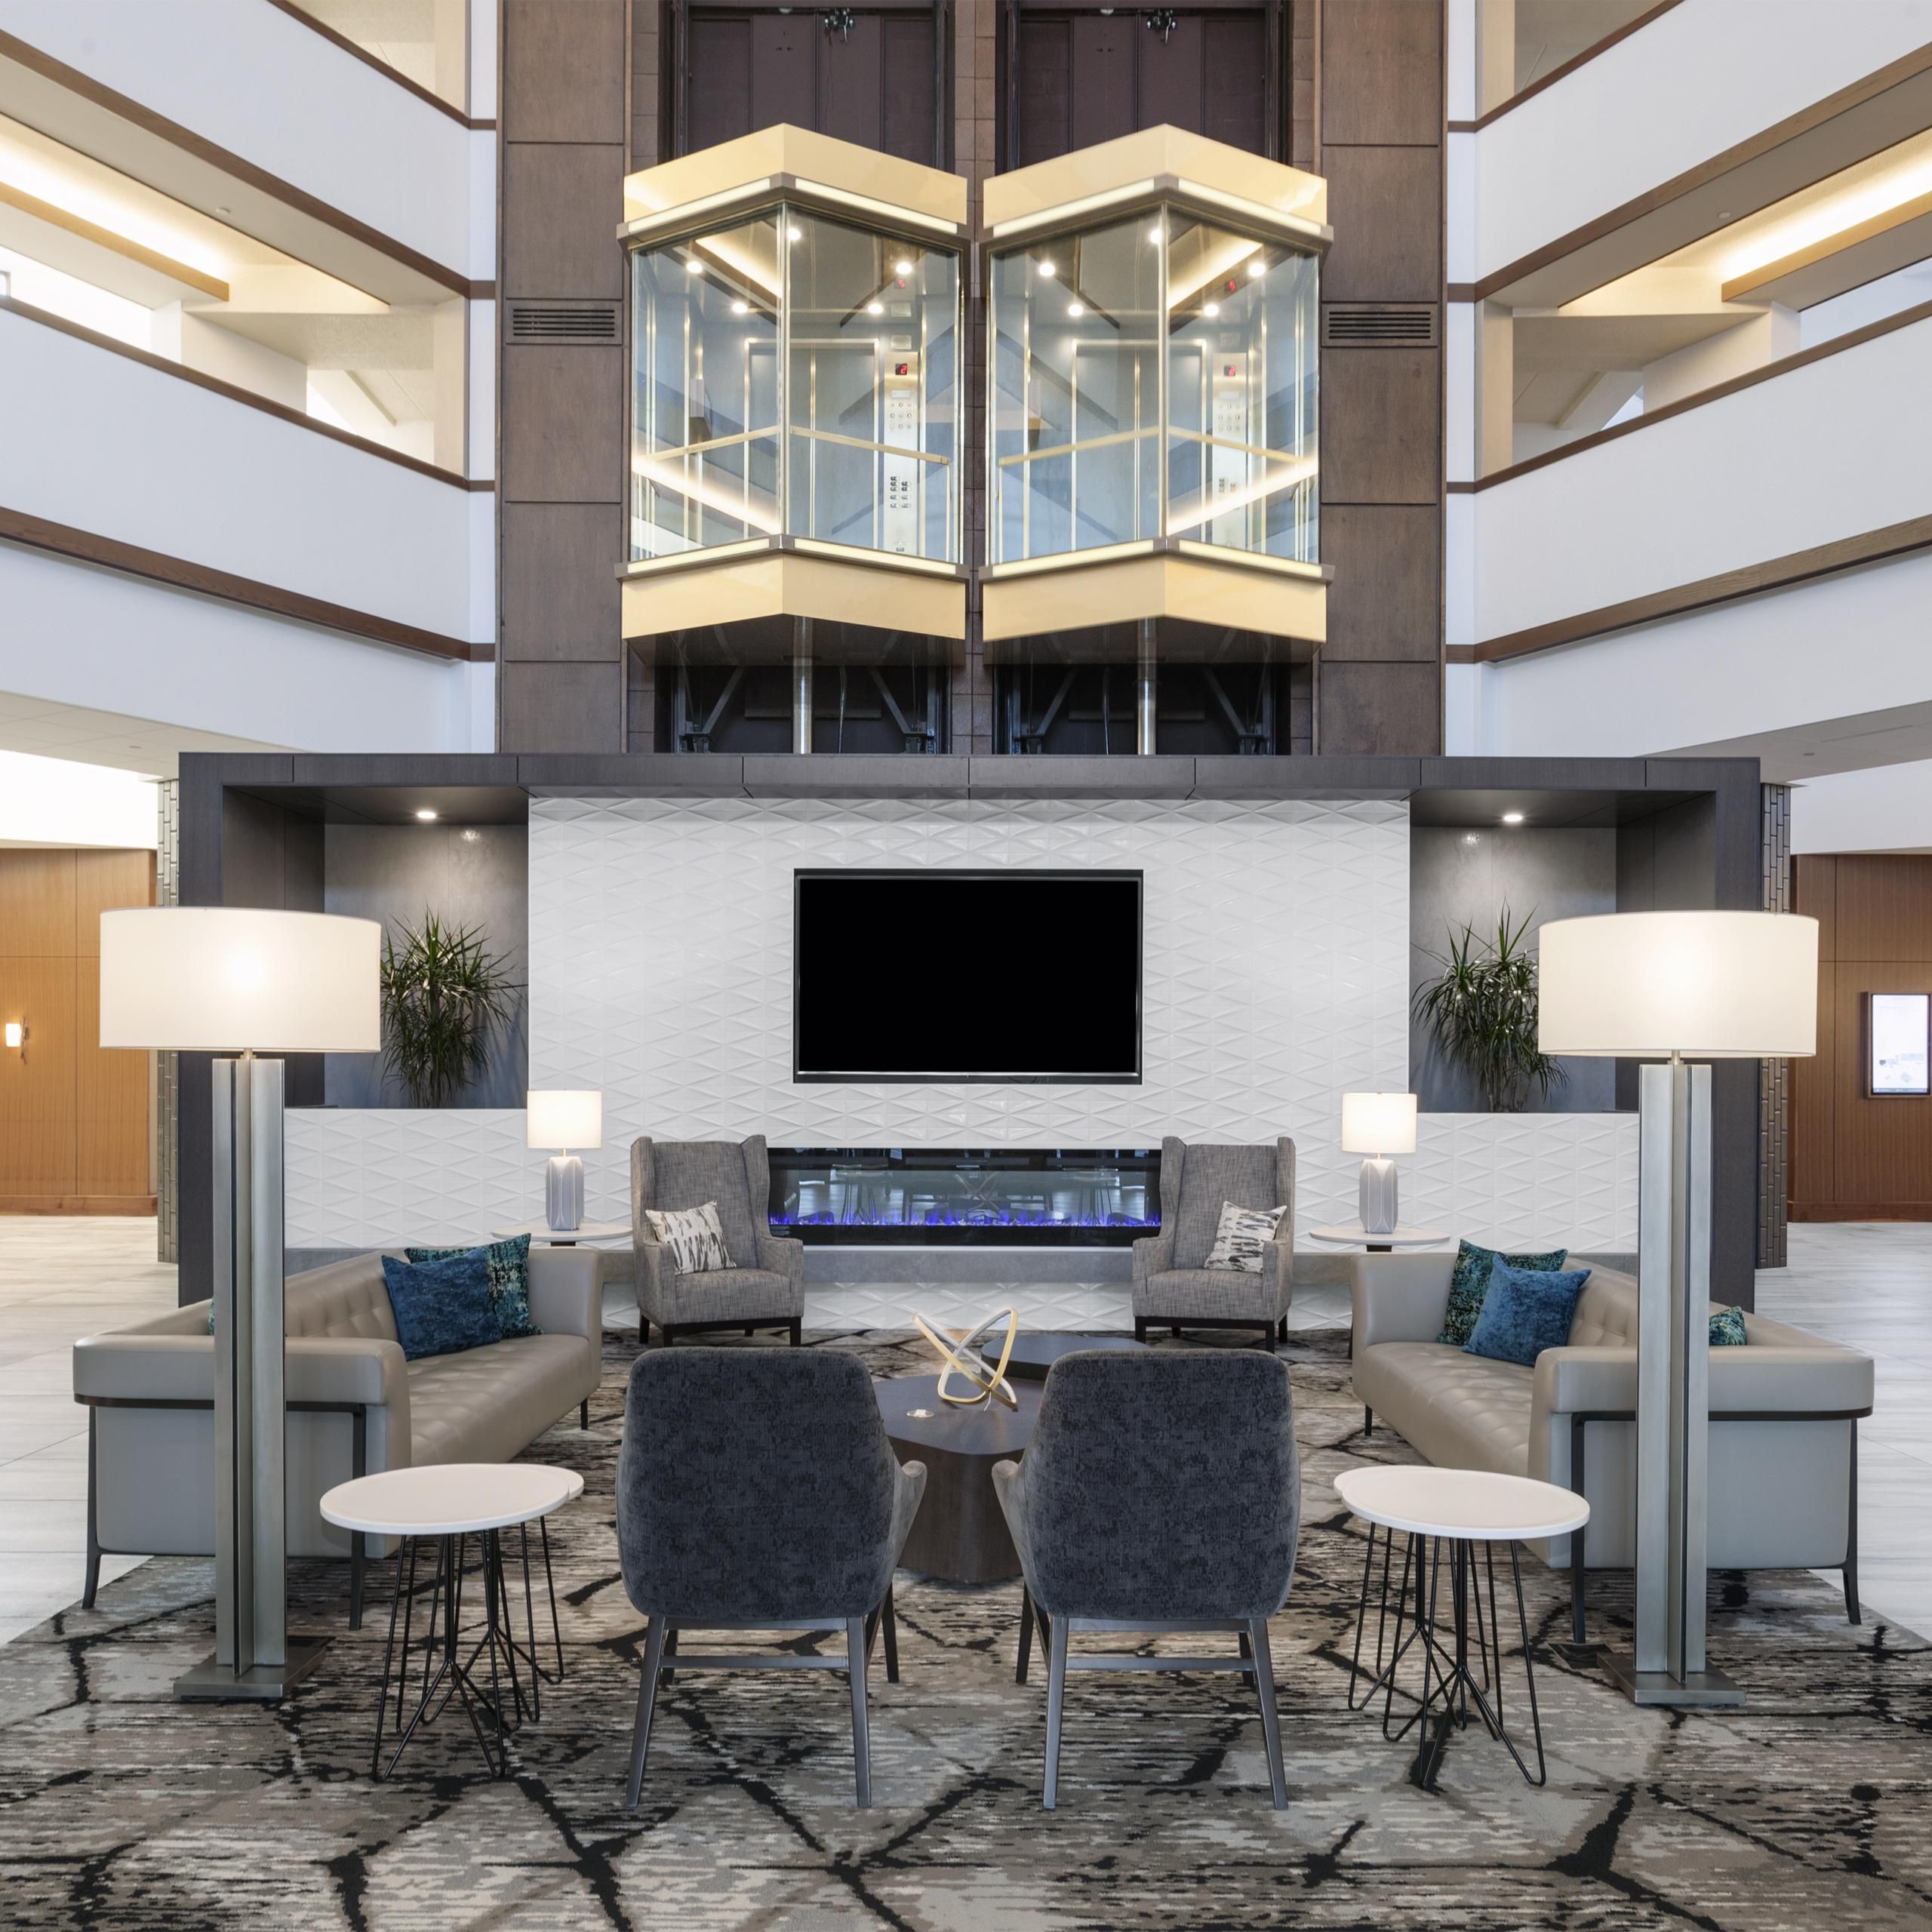 Welcome to the Crowne Plaza Lansing West!